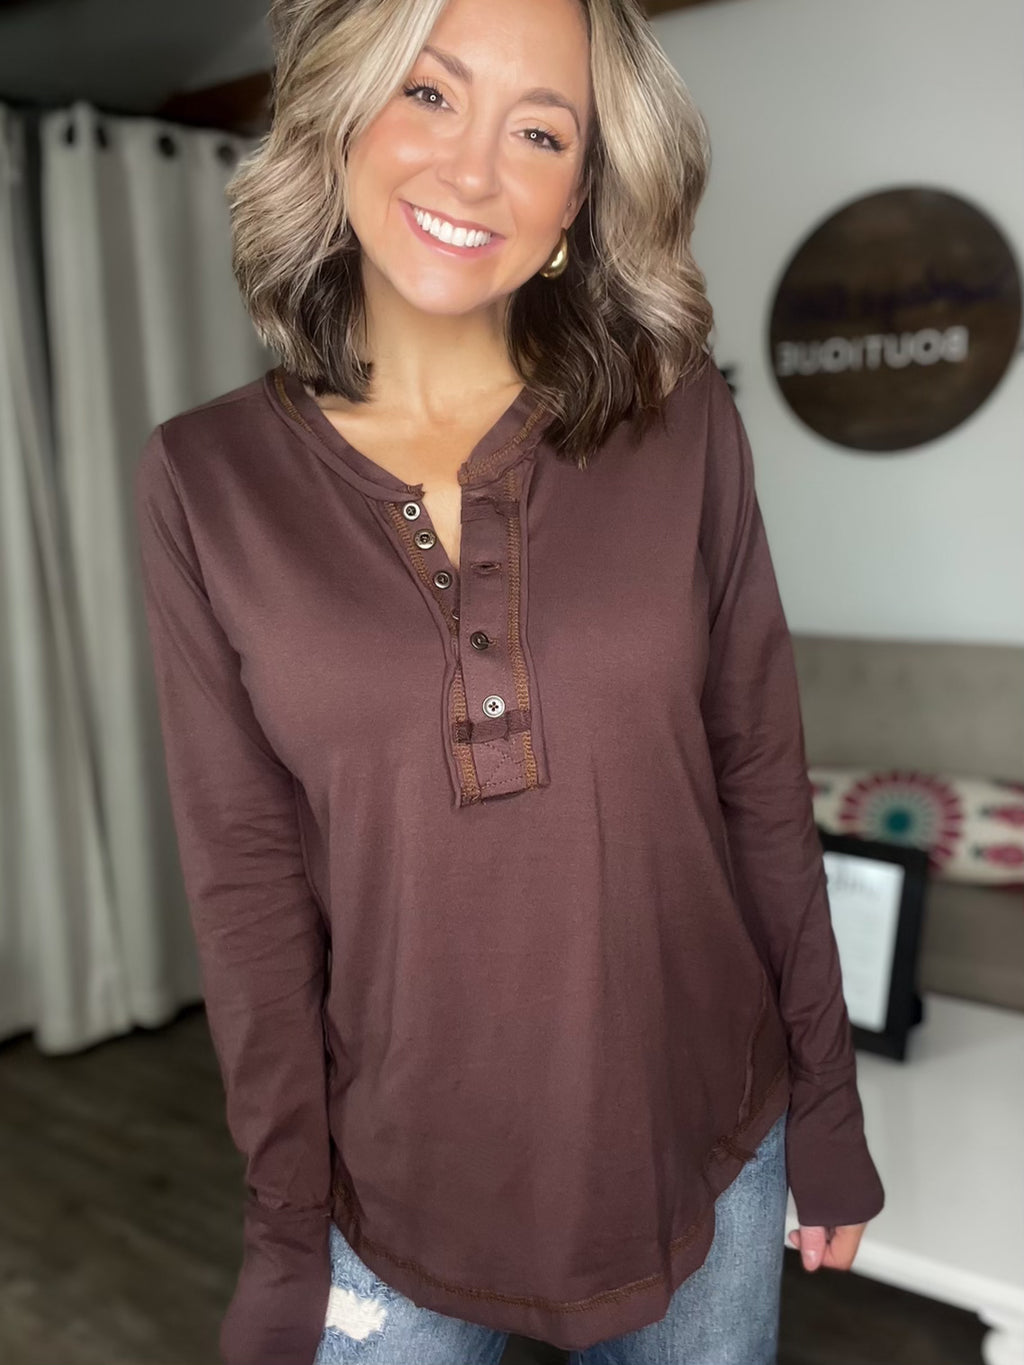 The Haleigh Top